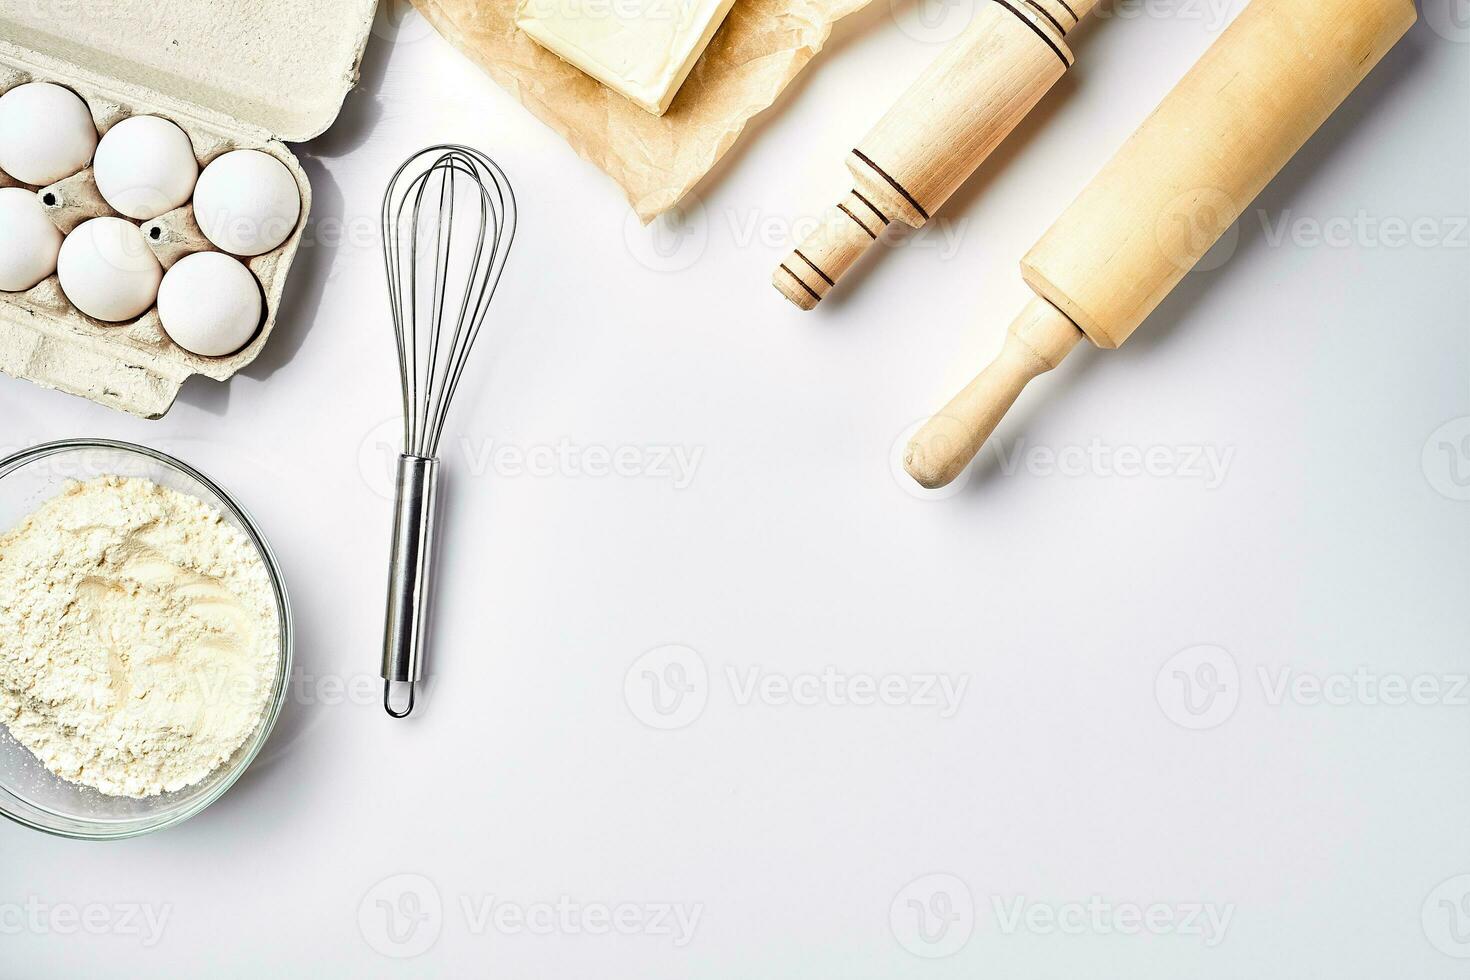 Preparation of the dough. Ingredients for the dough - flour, butter, eggs and various tools. On white background. Free space for text . Top view photo